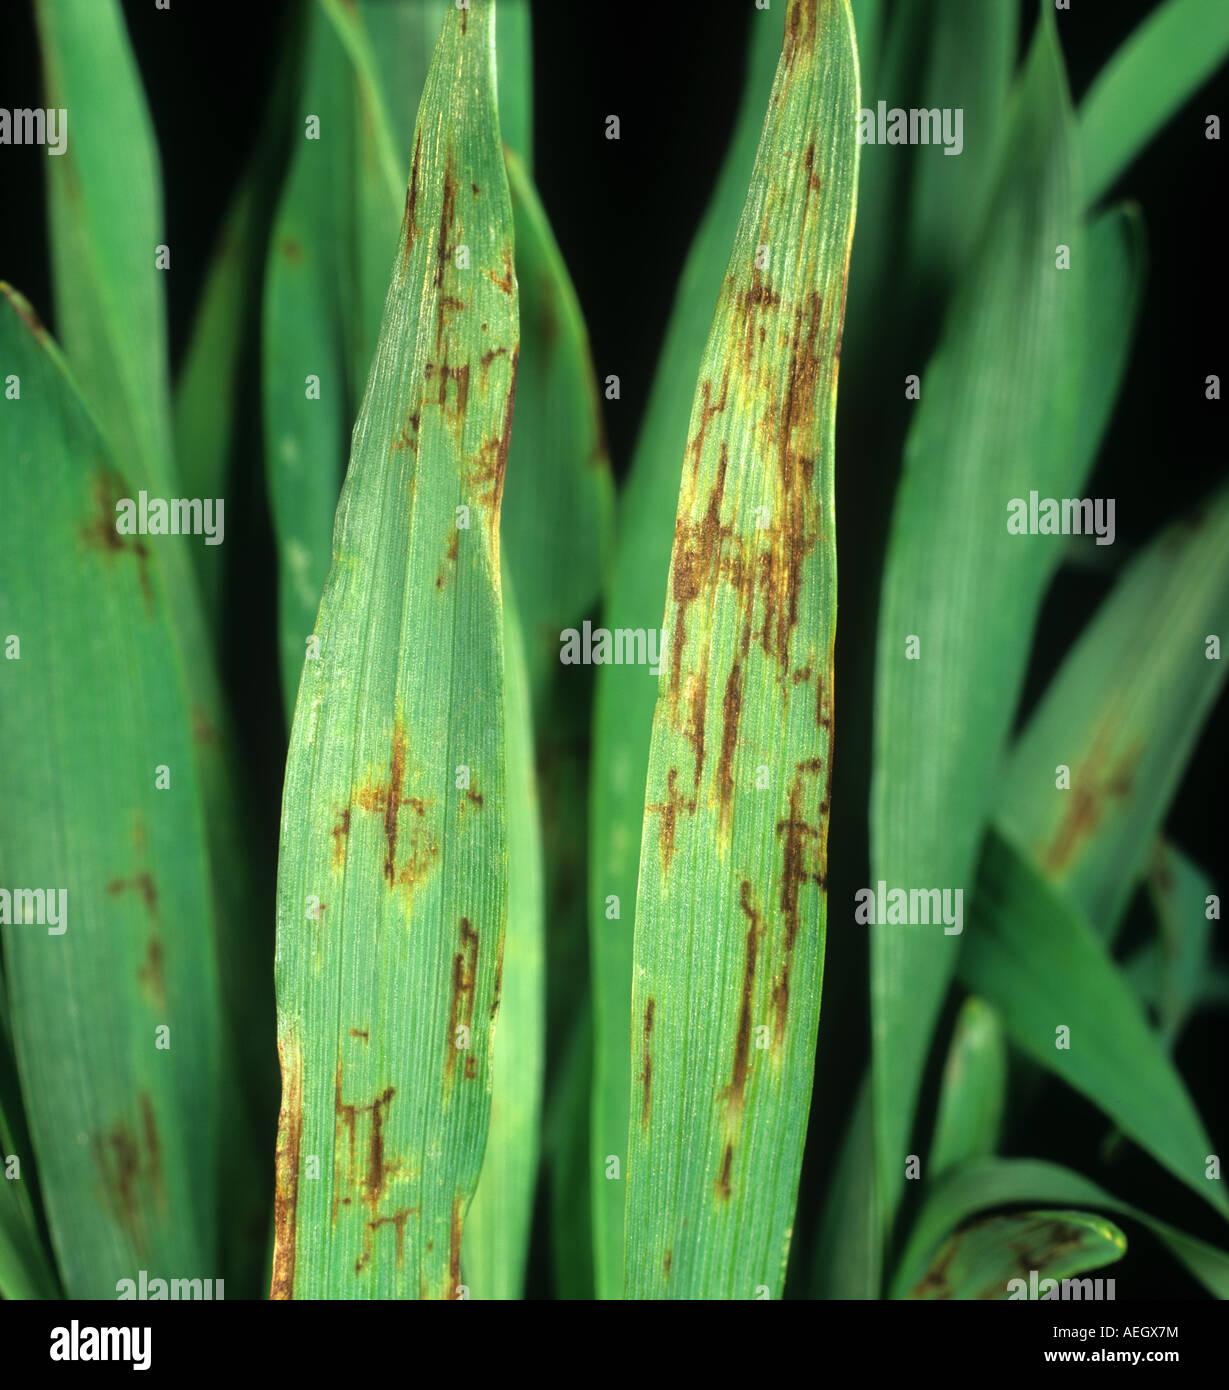 Net blotch Pyrenophora teres lesions on young barley leaves Stock Photo